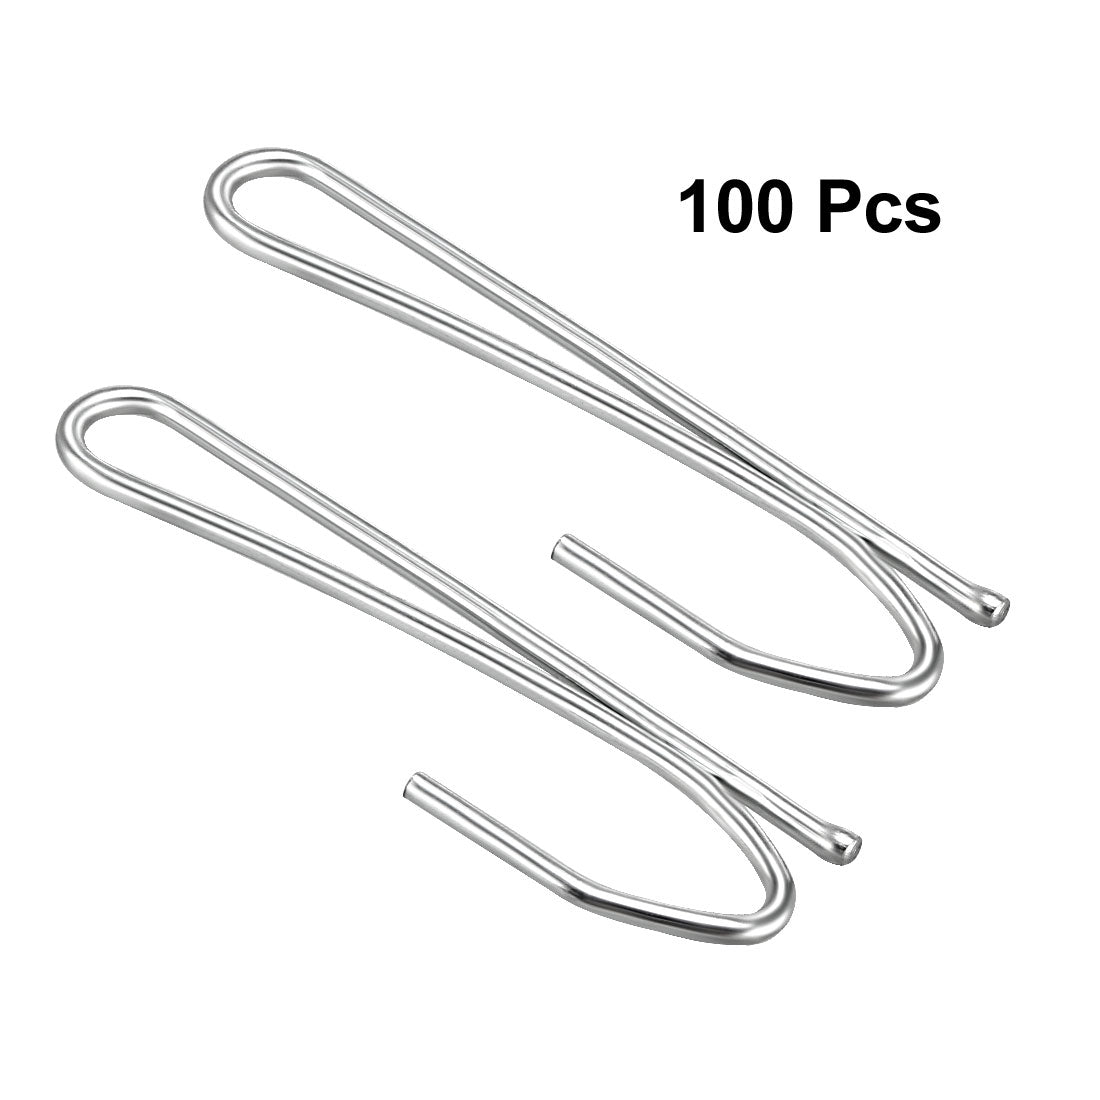 uxcell Uxcell Curtain Hooks Metal Single Prongs Pinch Pleat Drapery Hook for Drapes Tapes Silver Tone 100 Pcs